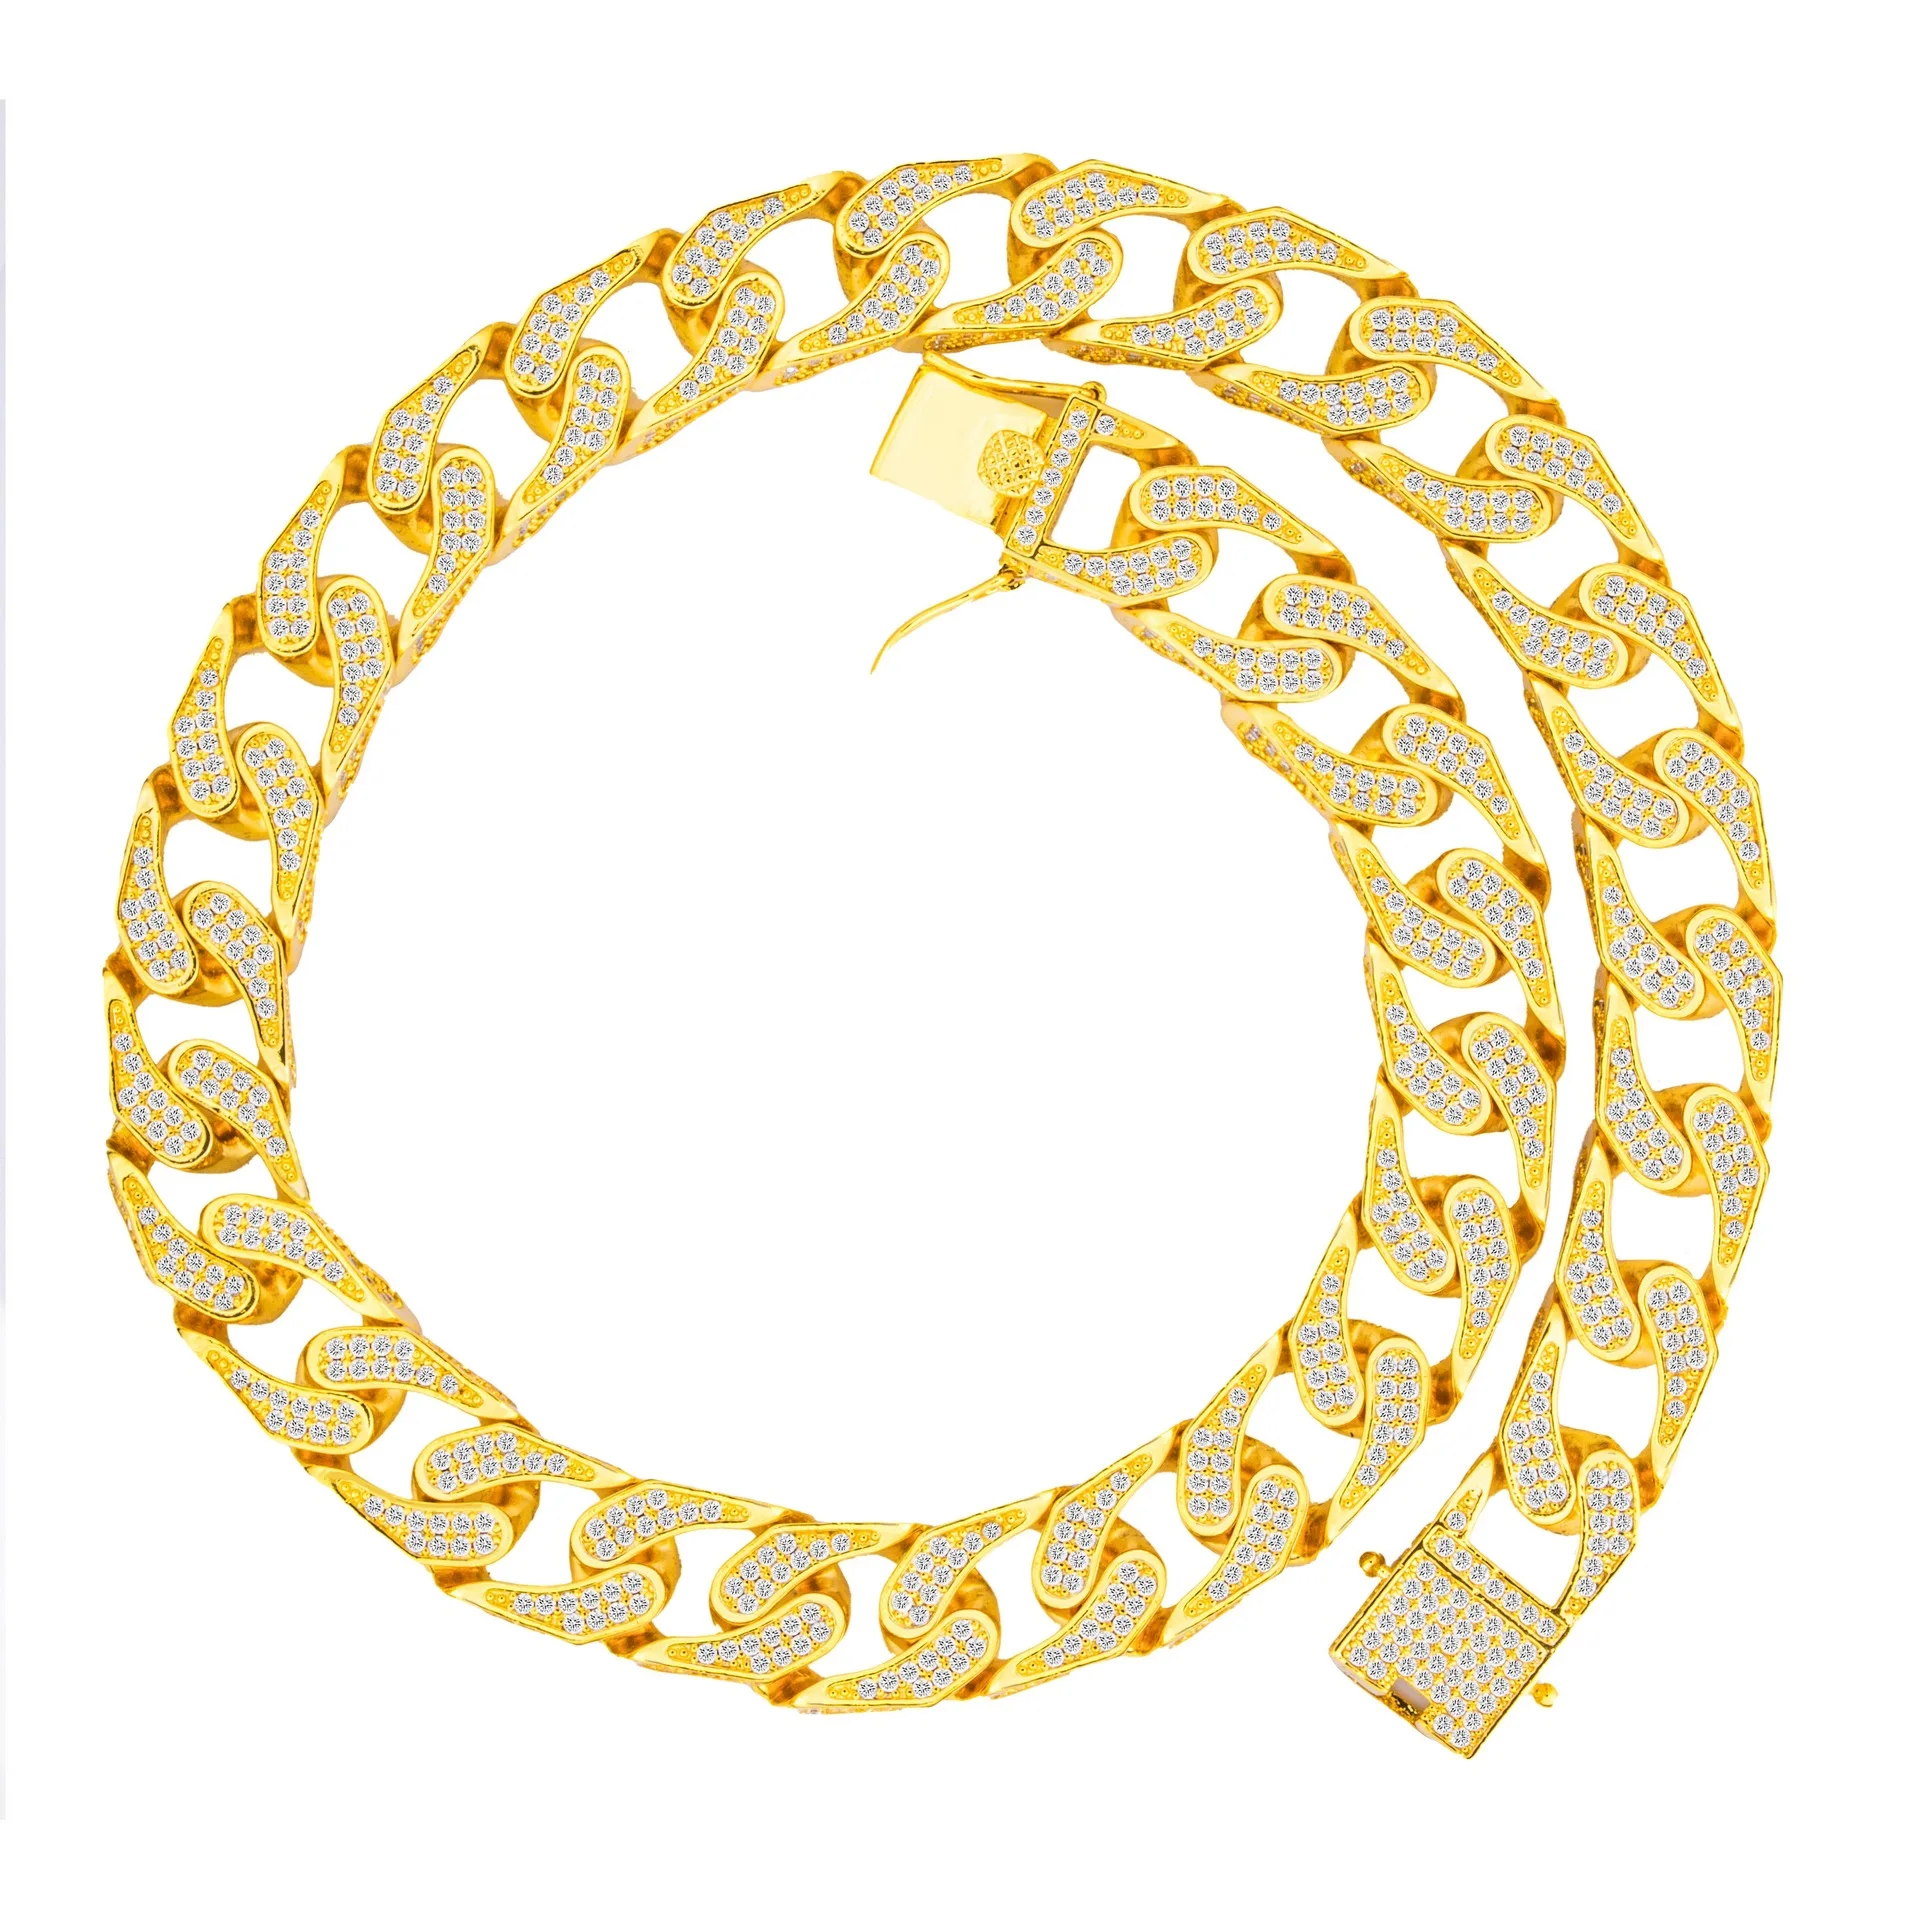 

15mm Iced Out Bling Gold Hip hop Jewelry Choker Necklace Finish Miami Cuban Link Chain